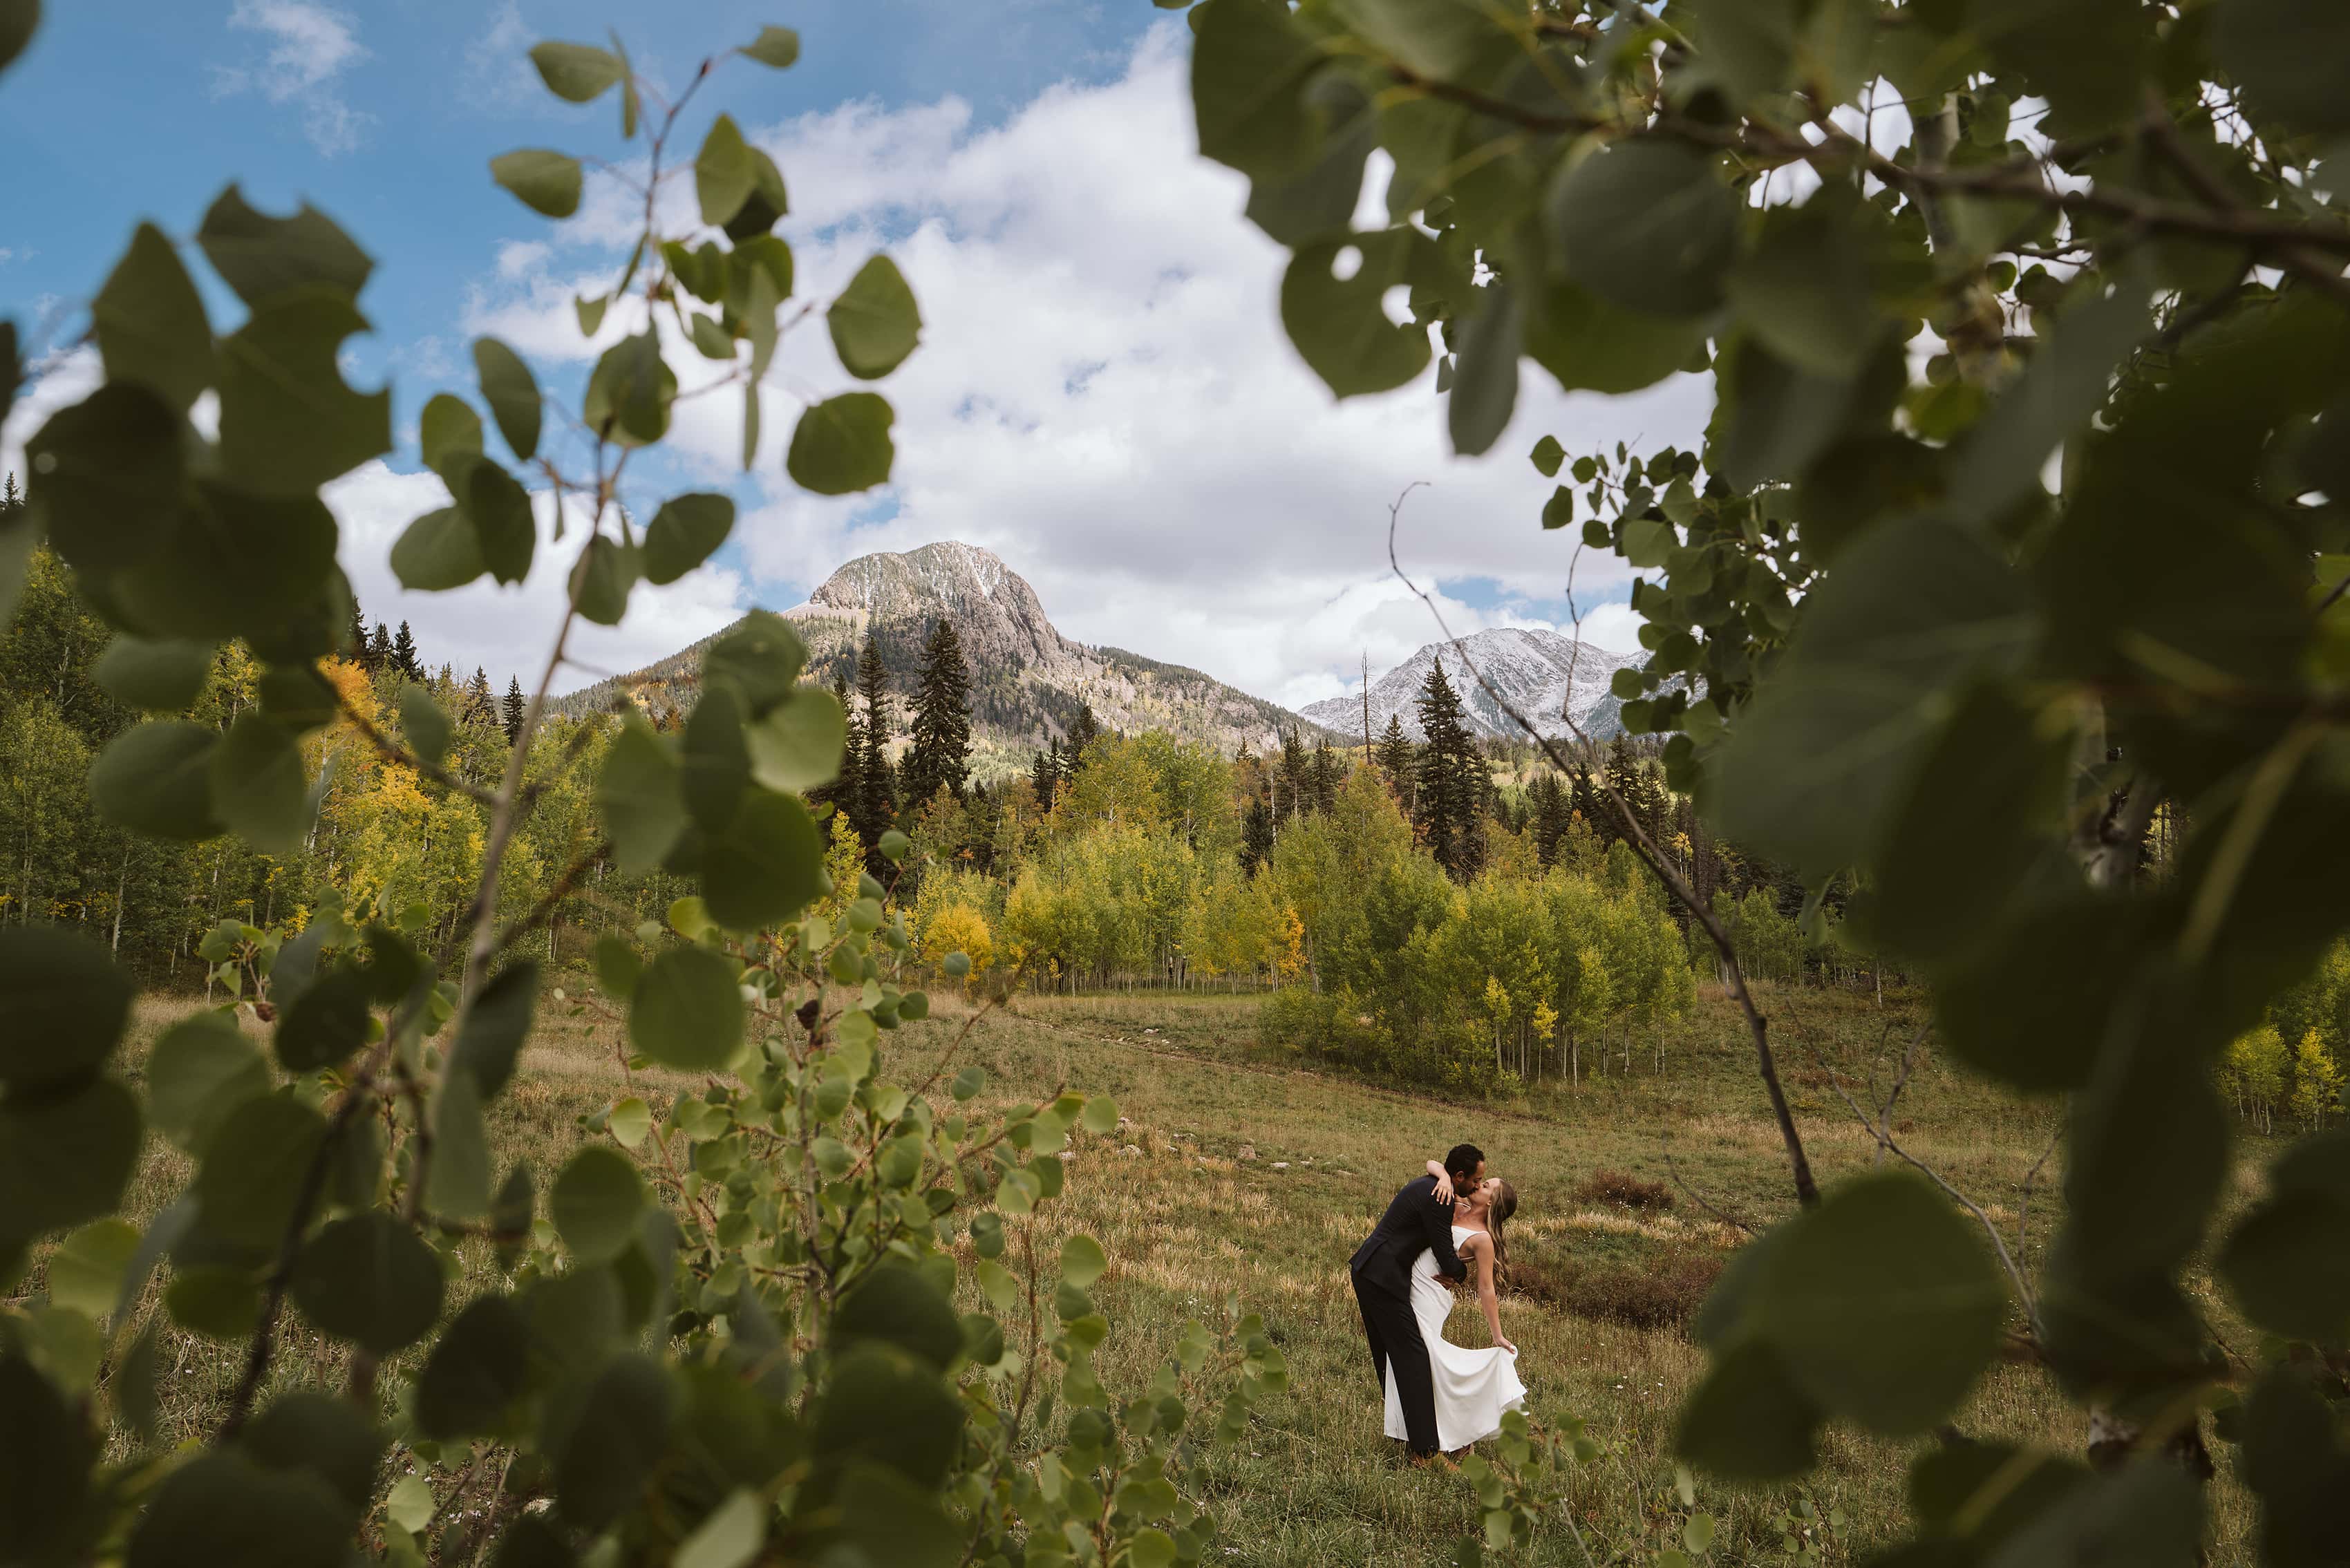 Justin Edmonds and Amy Brothers wedding at The Black Diamond Lodge in Durango